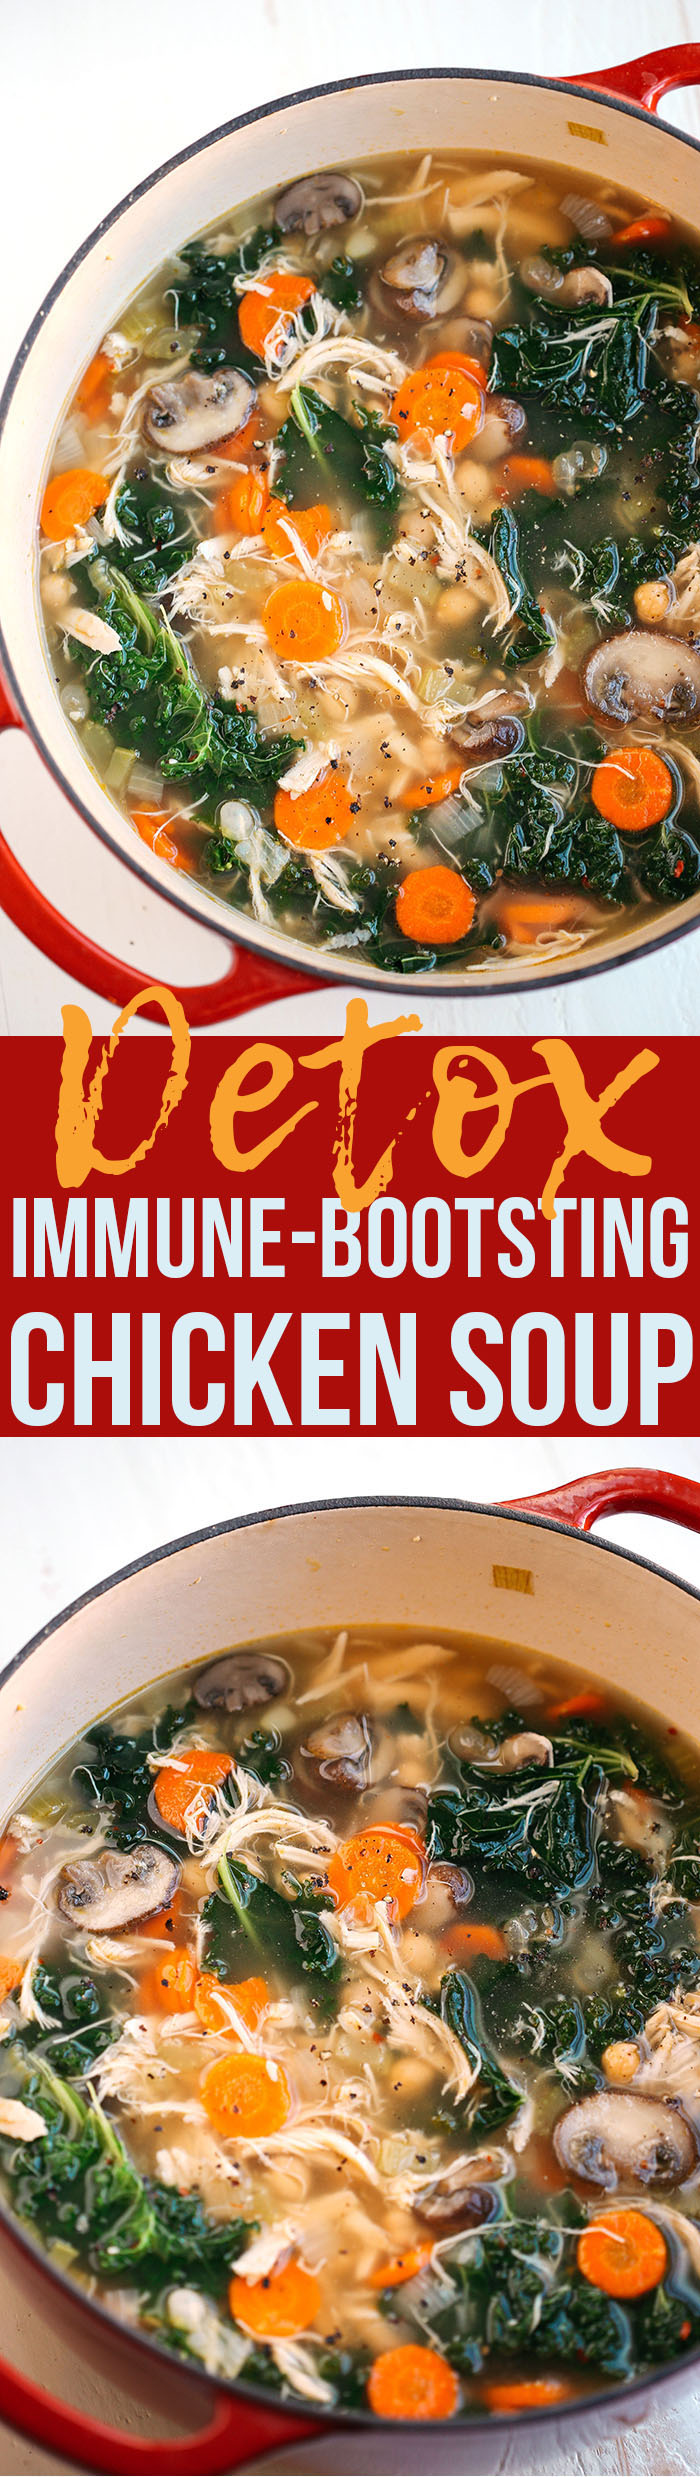 This Detox Immune-Boosting Chicken Soup is the perfect remedy for cold and flu season filled with tons of antioxidants that boost immunity and keep you warm all winter long!